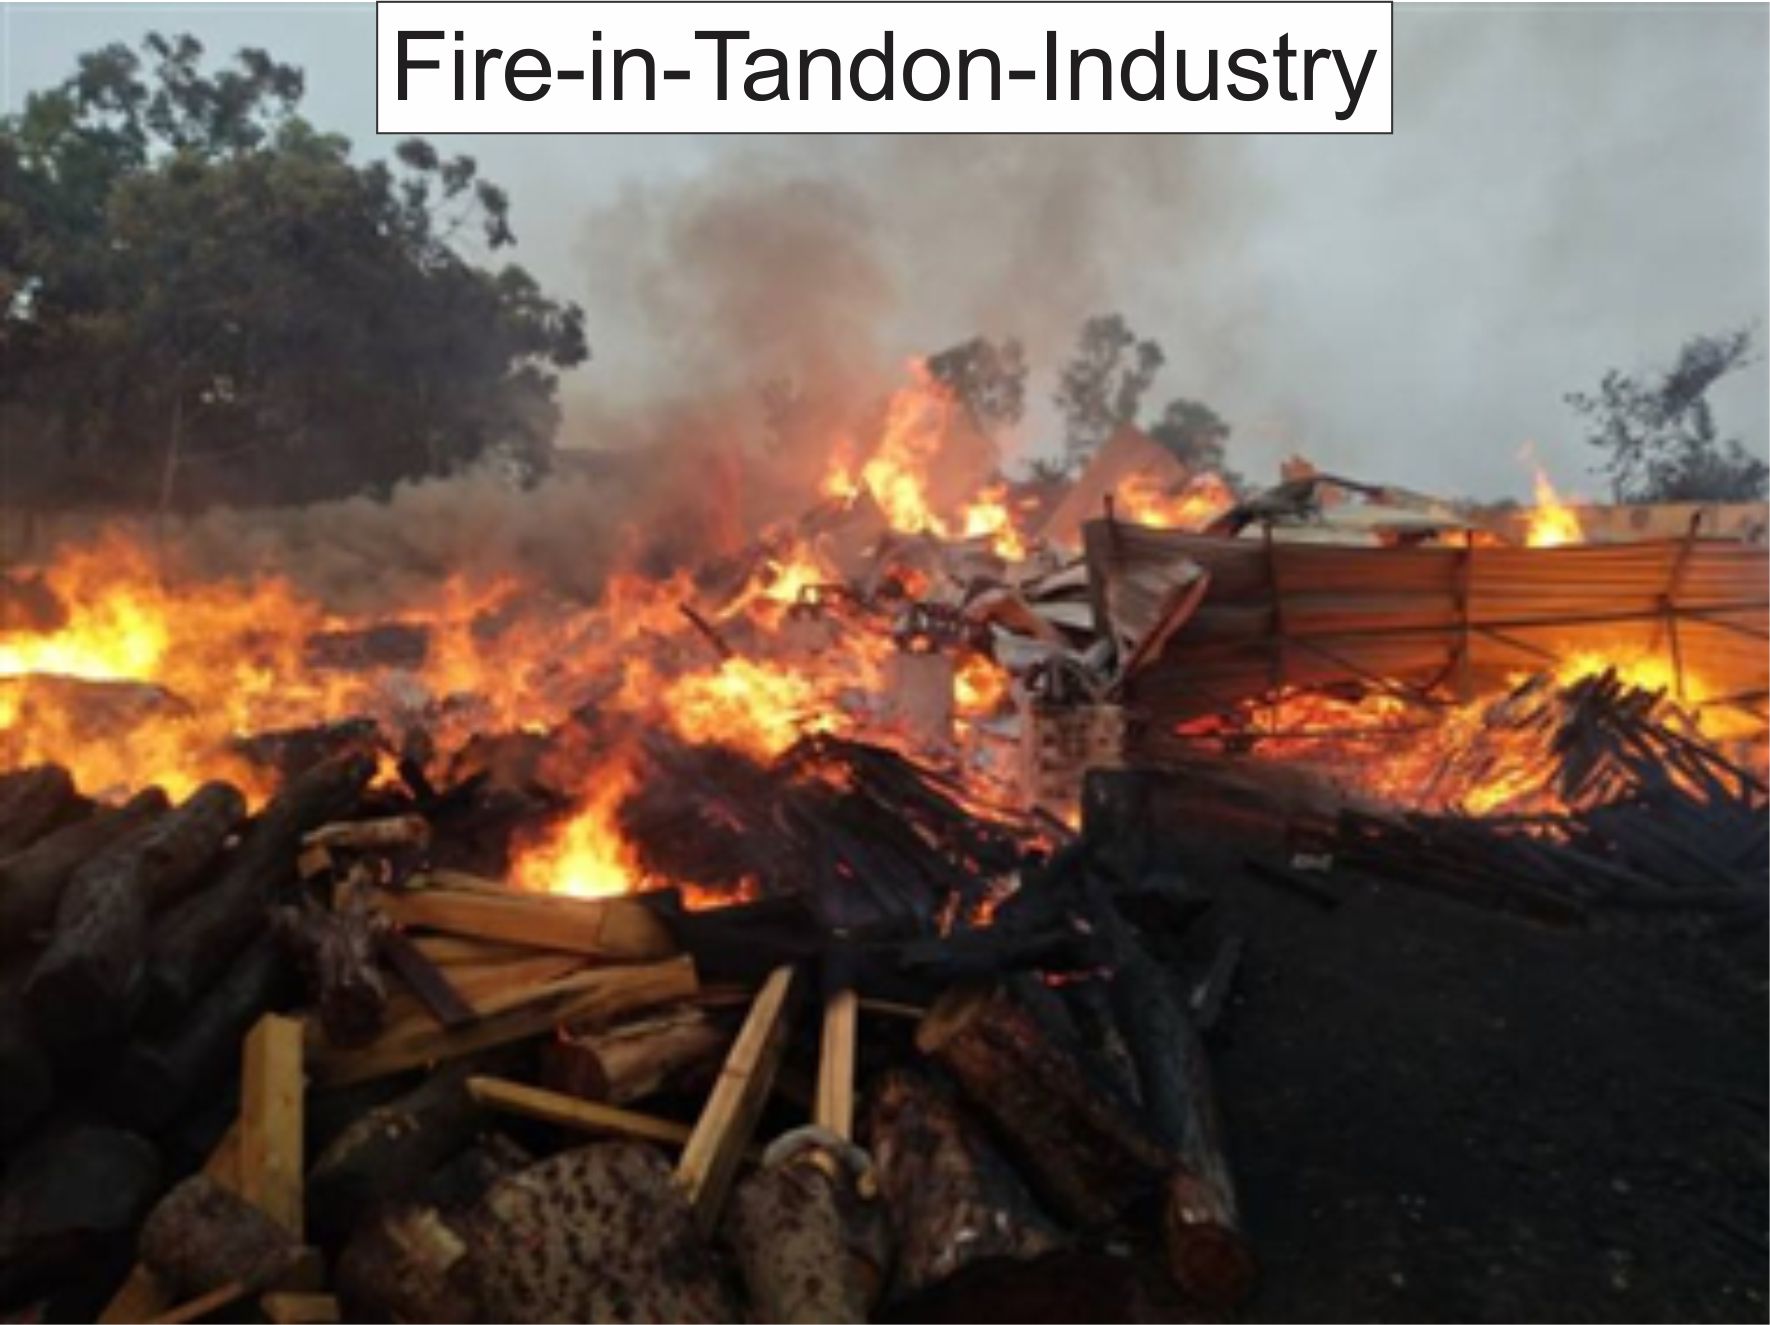 Fire-in-Tandon-Industry